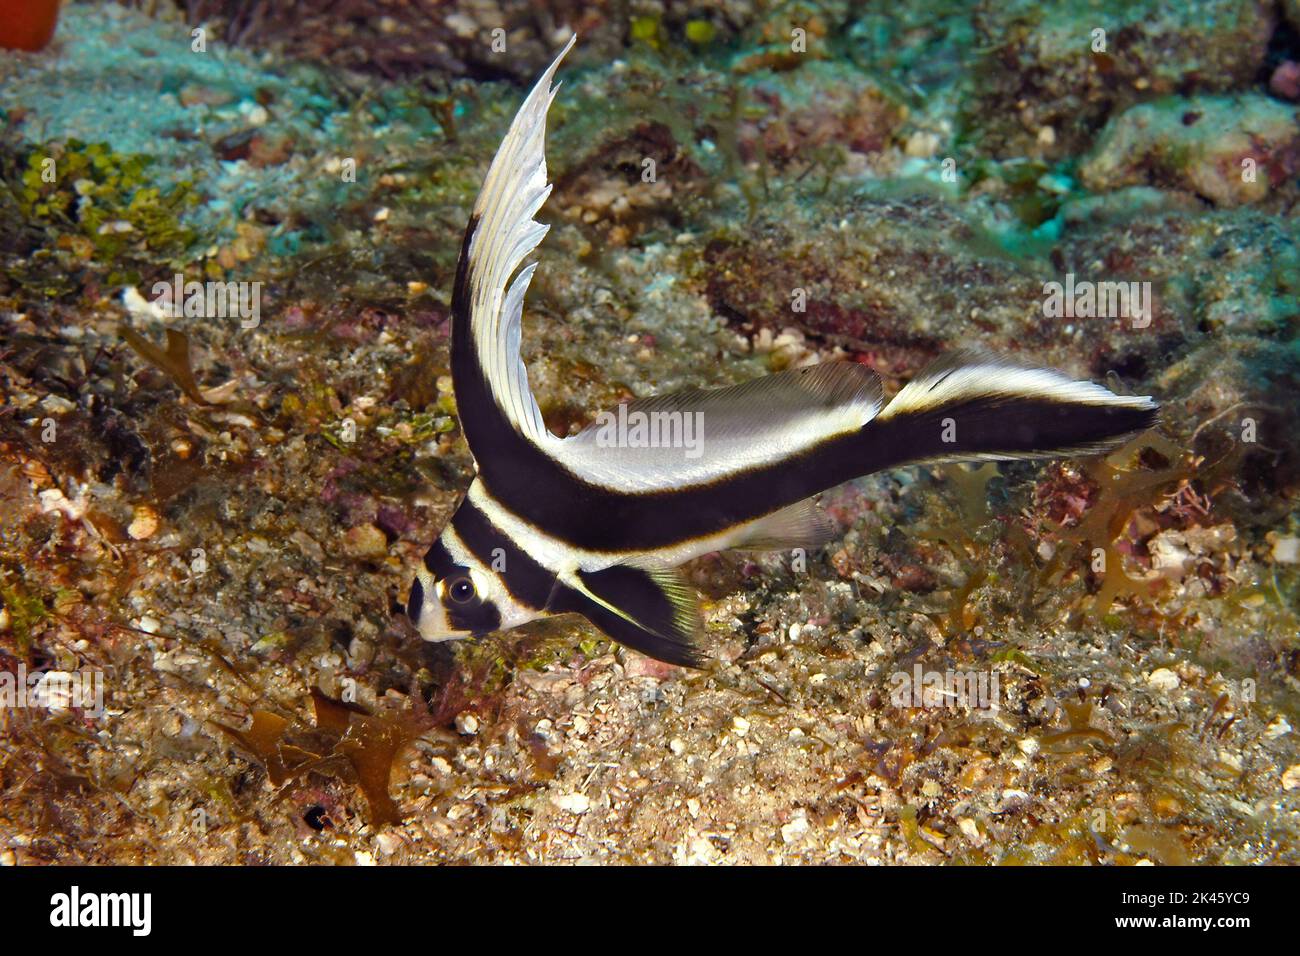 The elusive spotted drum swims along the edge of a reef moving rapidly, undulating its body making it very difficult to photograph. Stock Photo